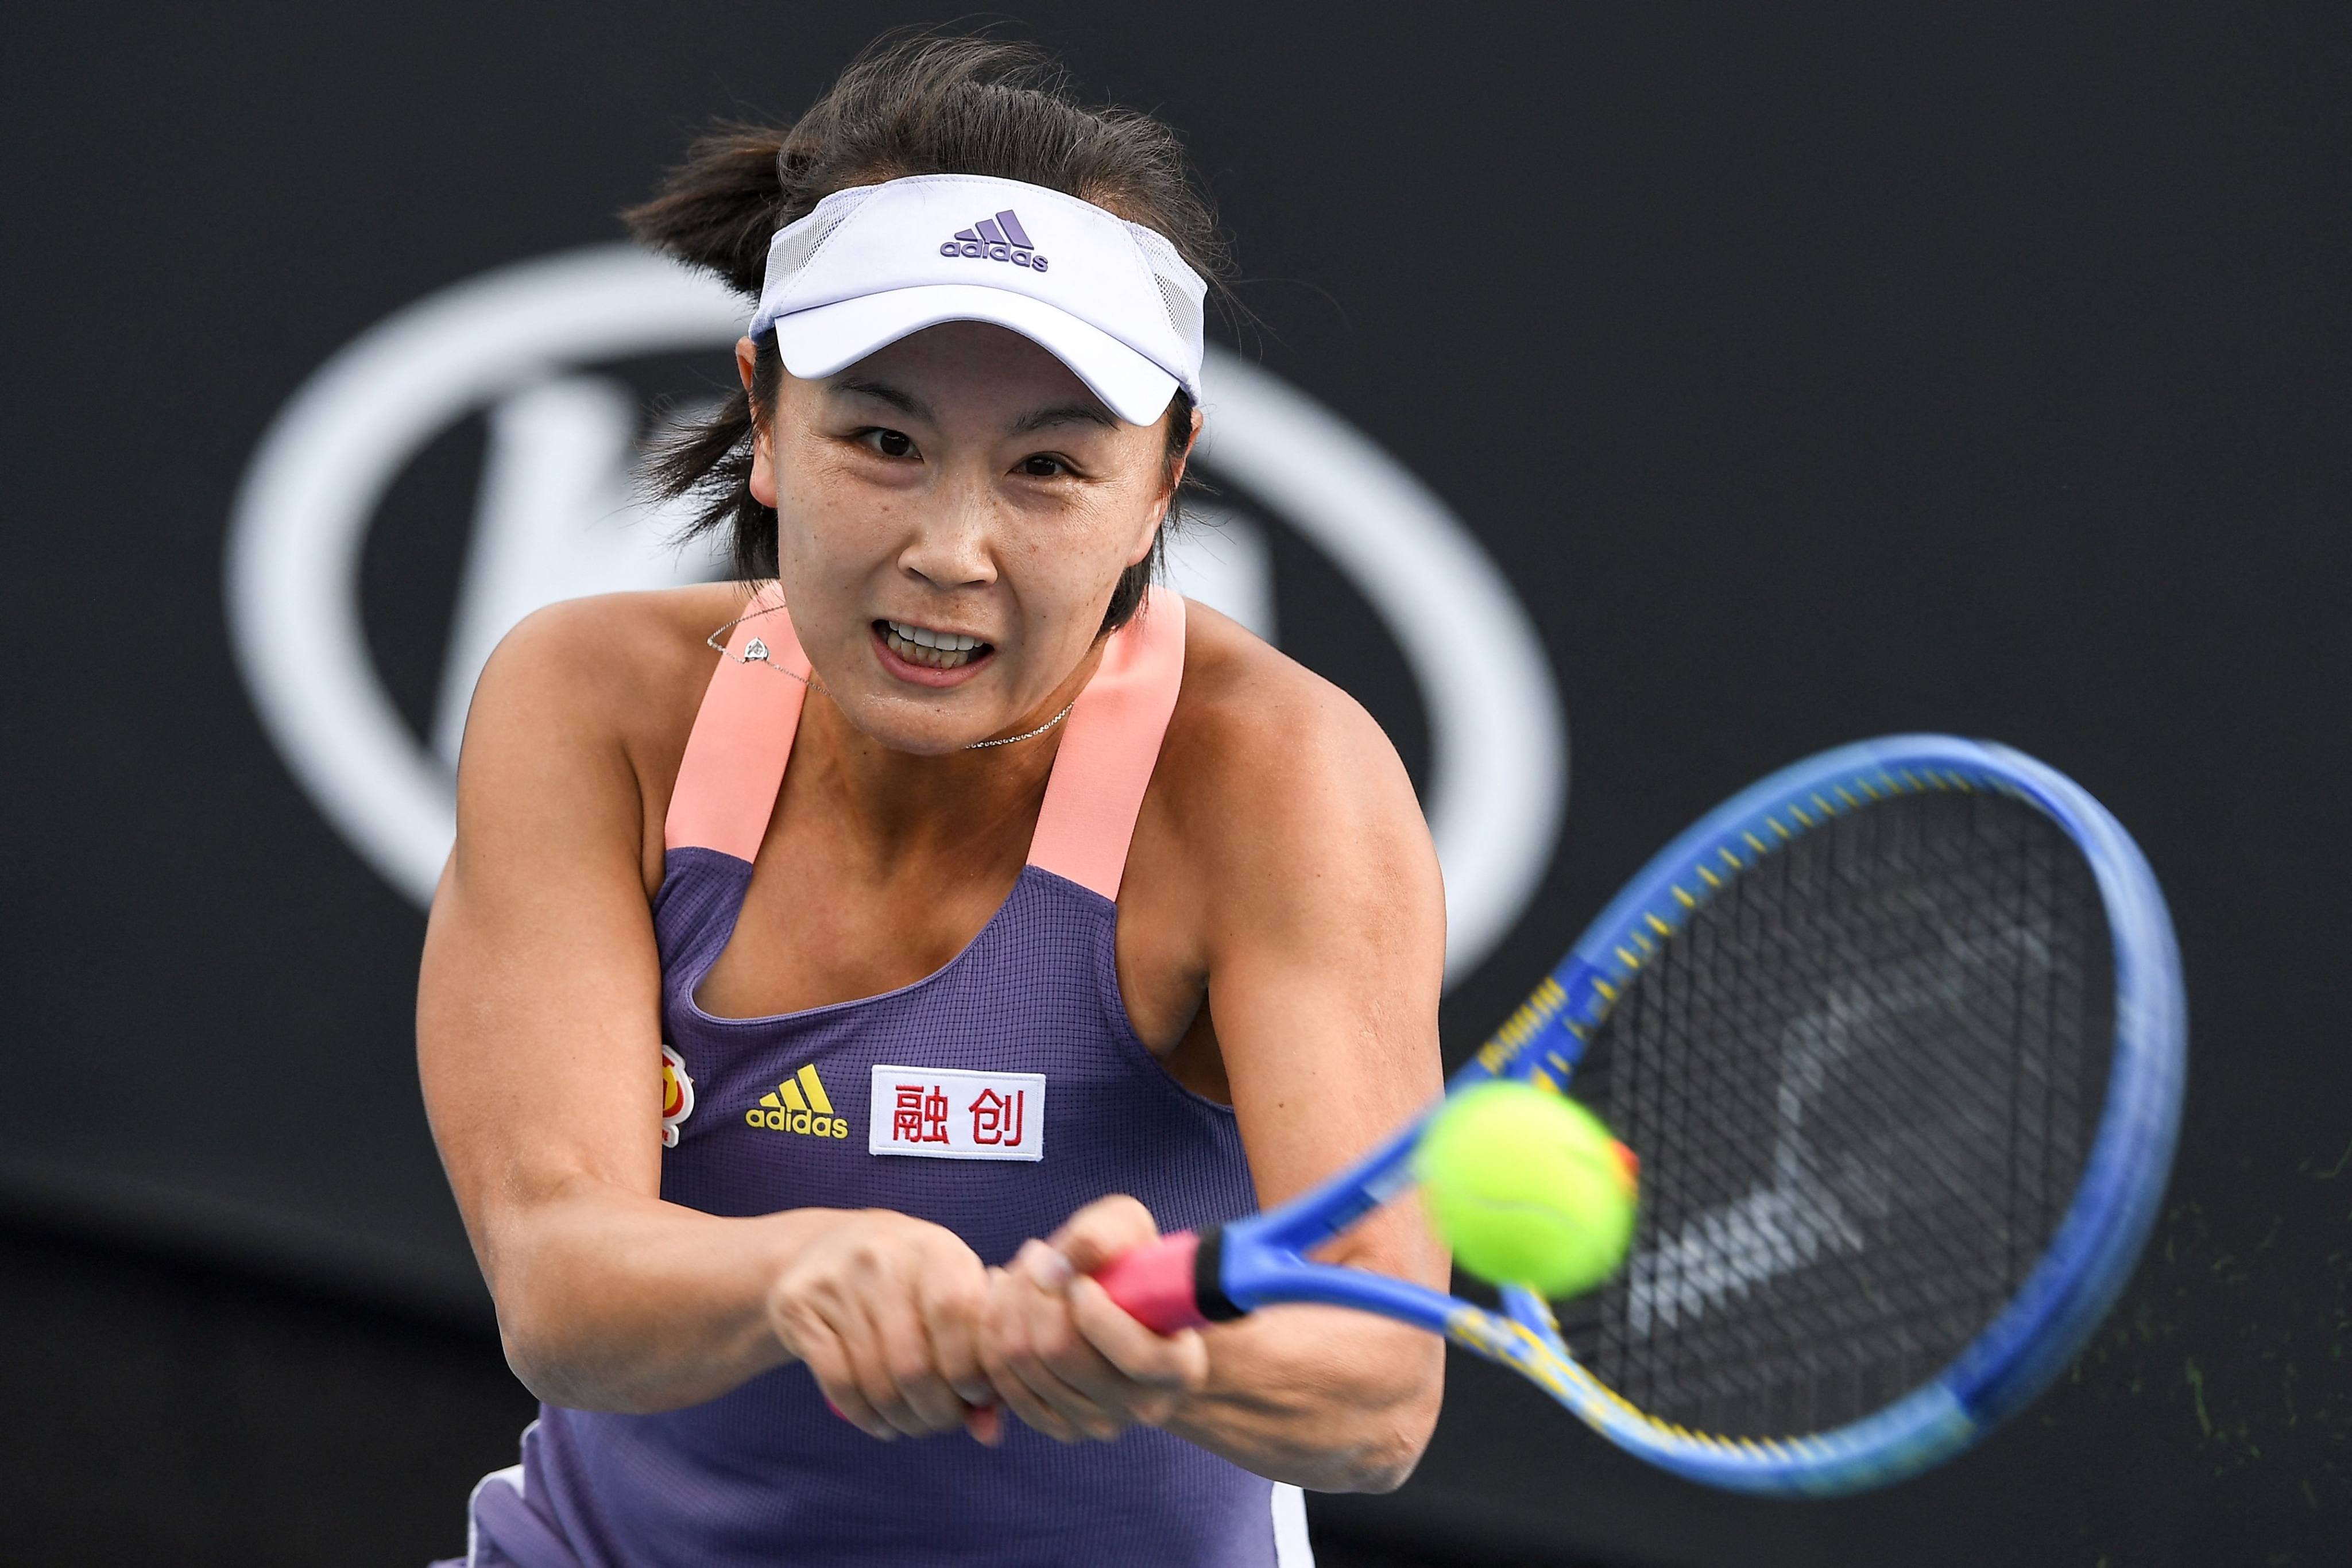 Professional women’s tennis tournaments will resume in China in September after a 16-month boycott over concerns for the safety of Chinese player Peng Shuai, the WTA announced on April, 13, 2023. Photo: AFP